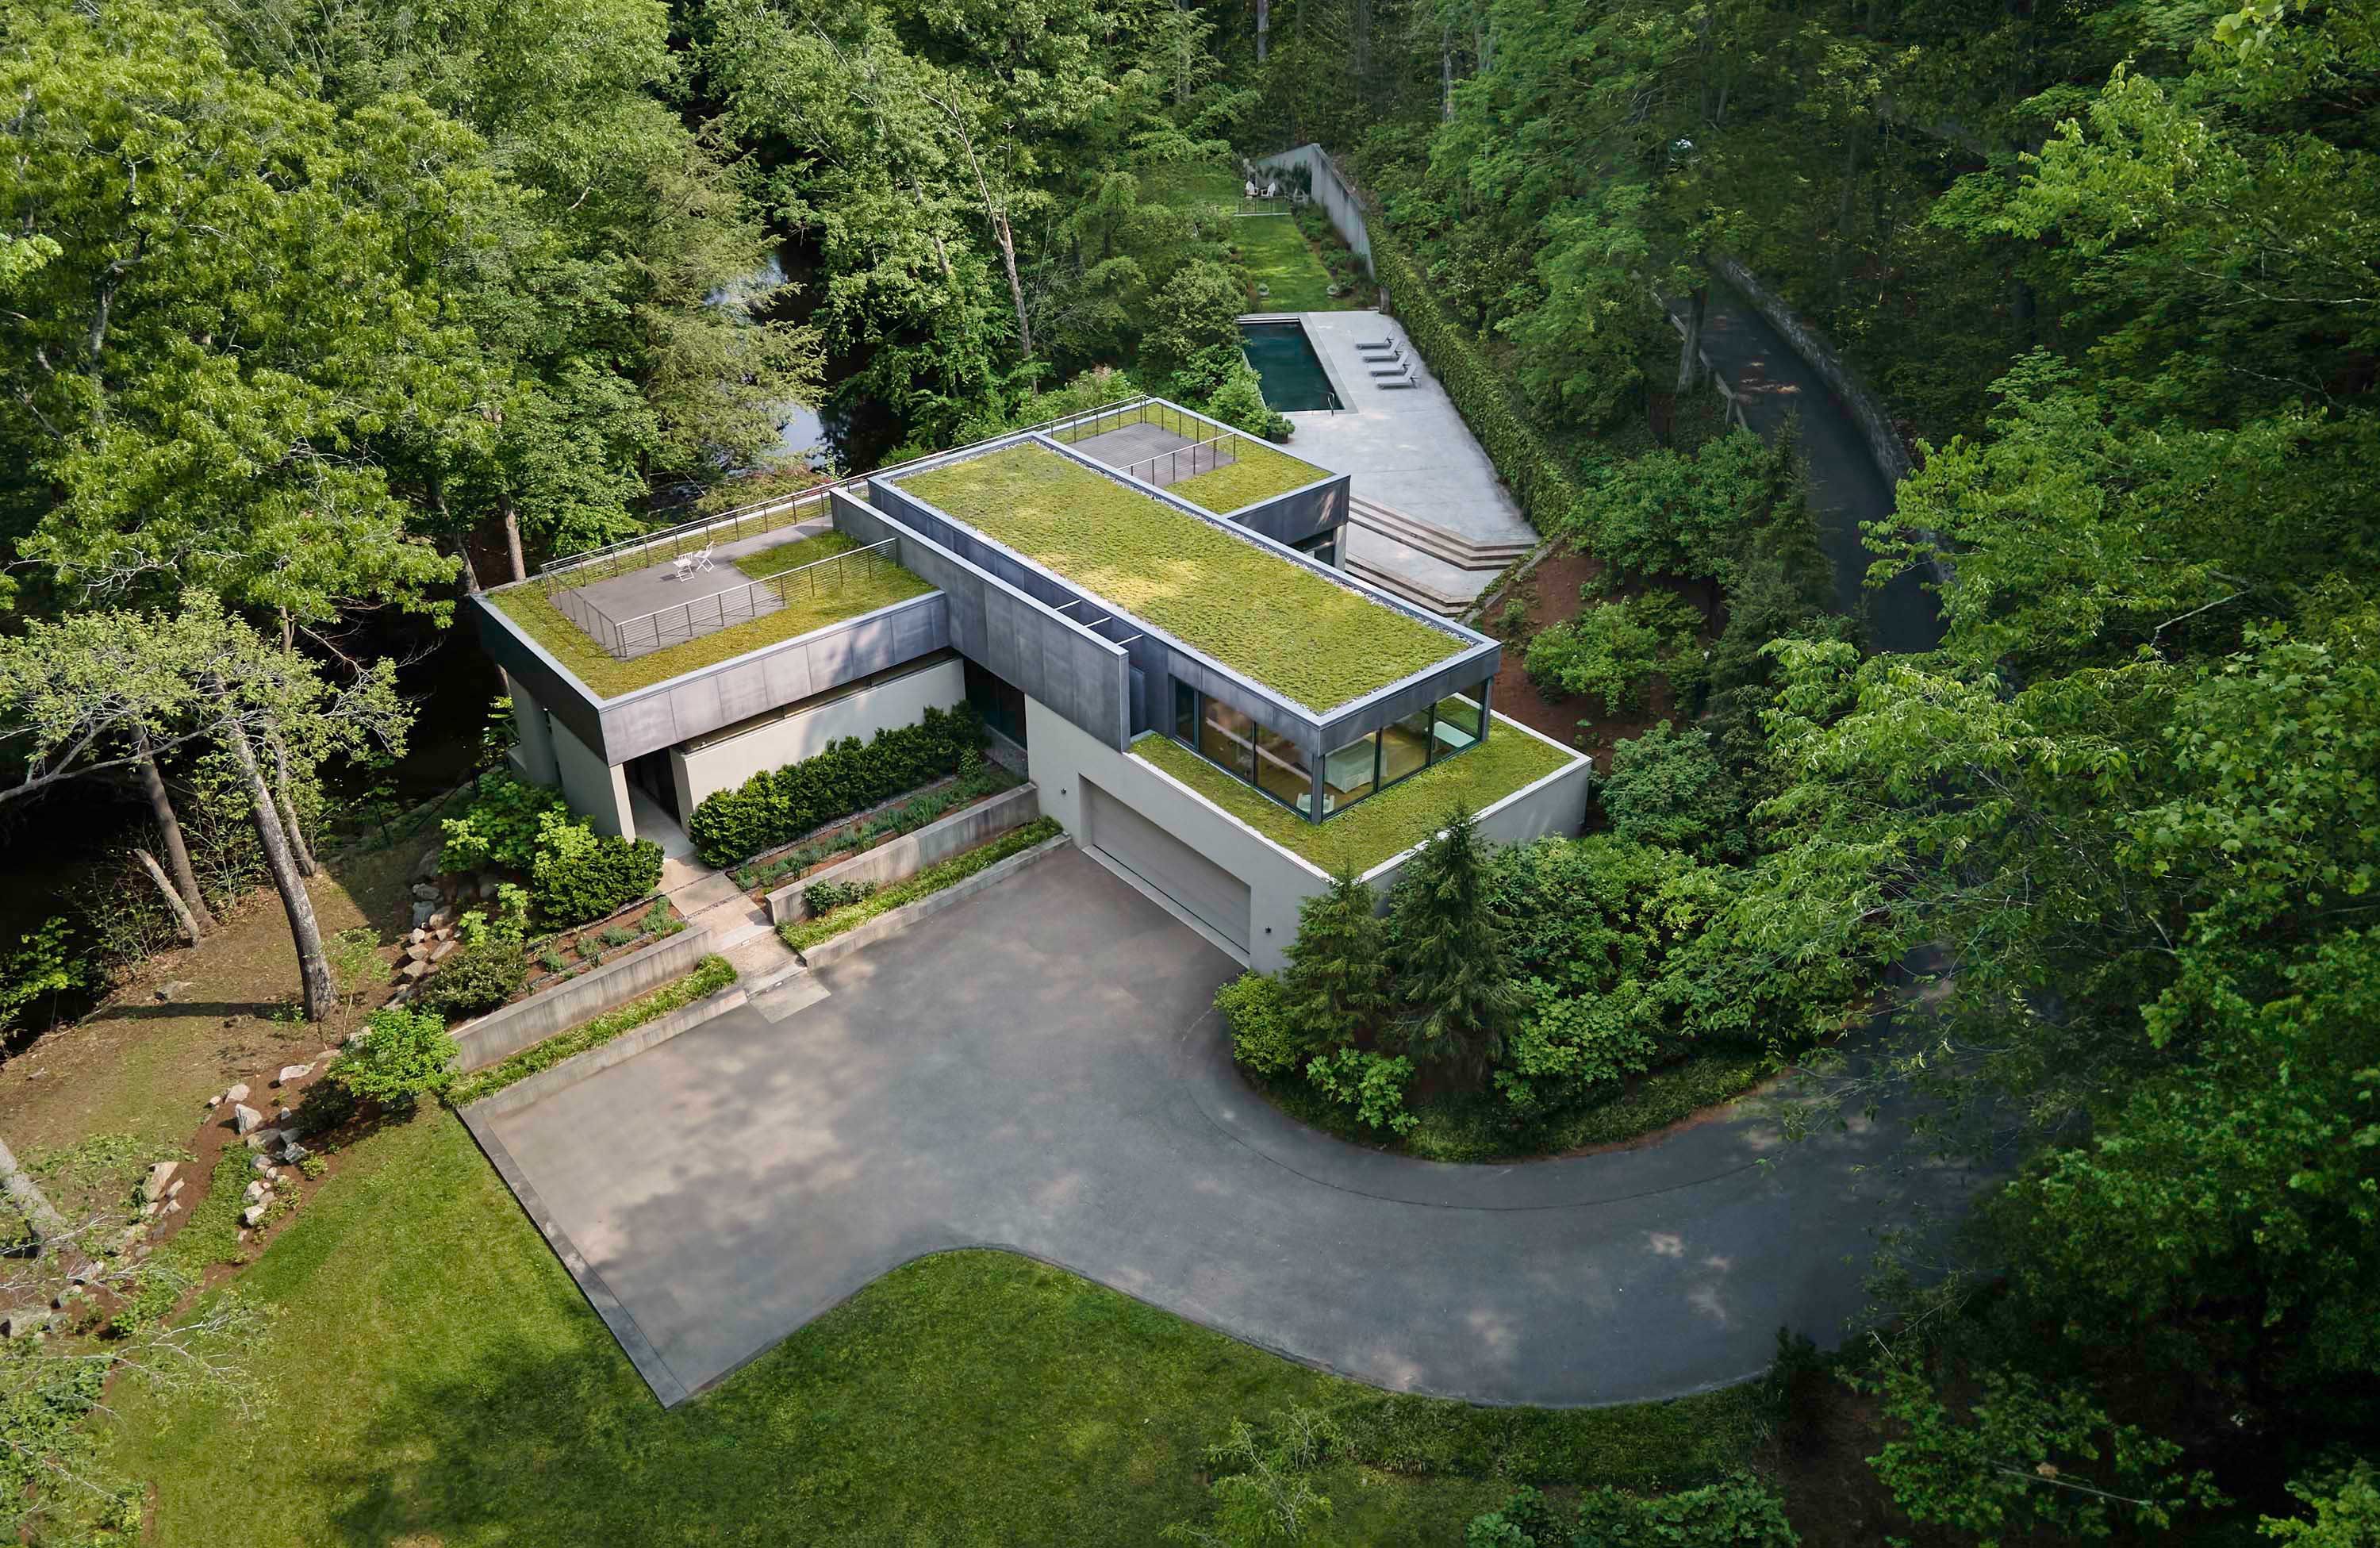 Exterior photo of Weston Residence by Specht Novak Architects. Shot by Jasper Lazor, featuring the concrete and glass home with roof gardens immersed in the landscape from an aerial perspective.